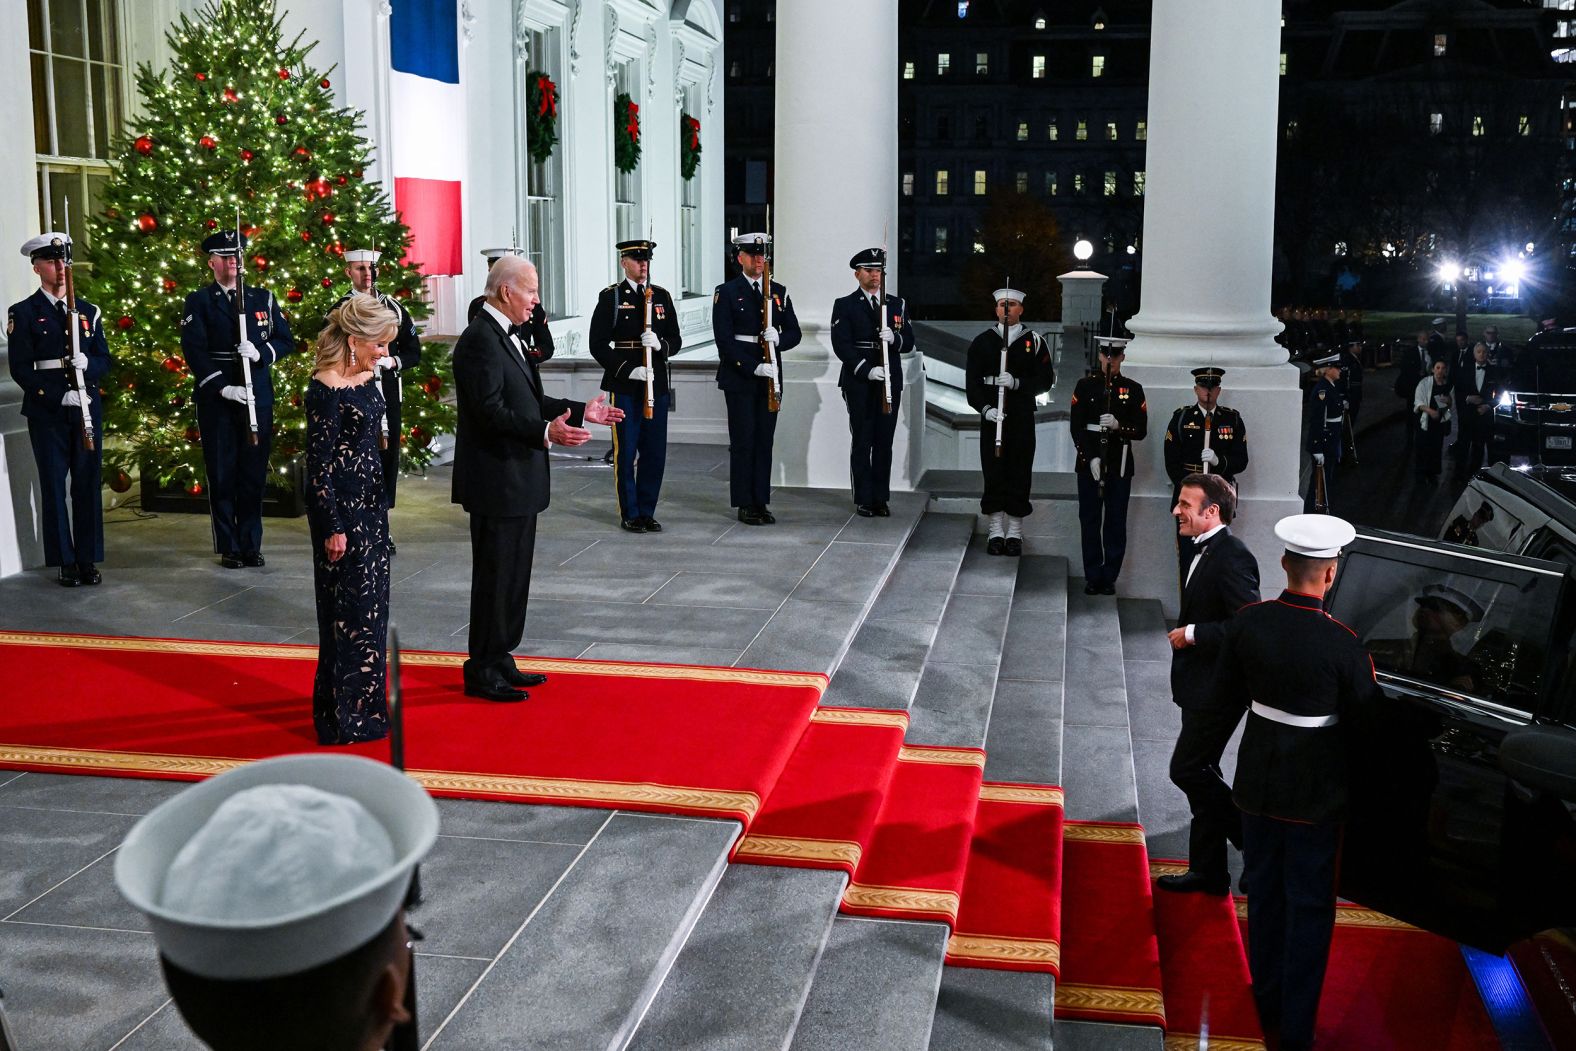 US President Joe Biden and first lady Jill Biden greet French President Emmanuel Macron and his wife, Brigitte, as they arrive for a <a href="http://www.cnn.com/2022/12/01/politics/gallery/macron-biden-white-house-state-dinner/index.html" target="_blank">state dinner</a> at the White House in December 2022. It was the first state dinner of the Biden administration, and the first since the start of the Covid-19 pandemic.